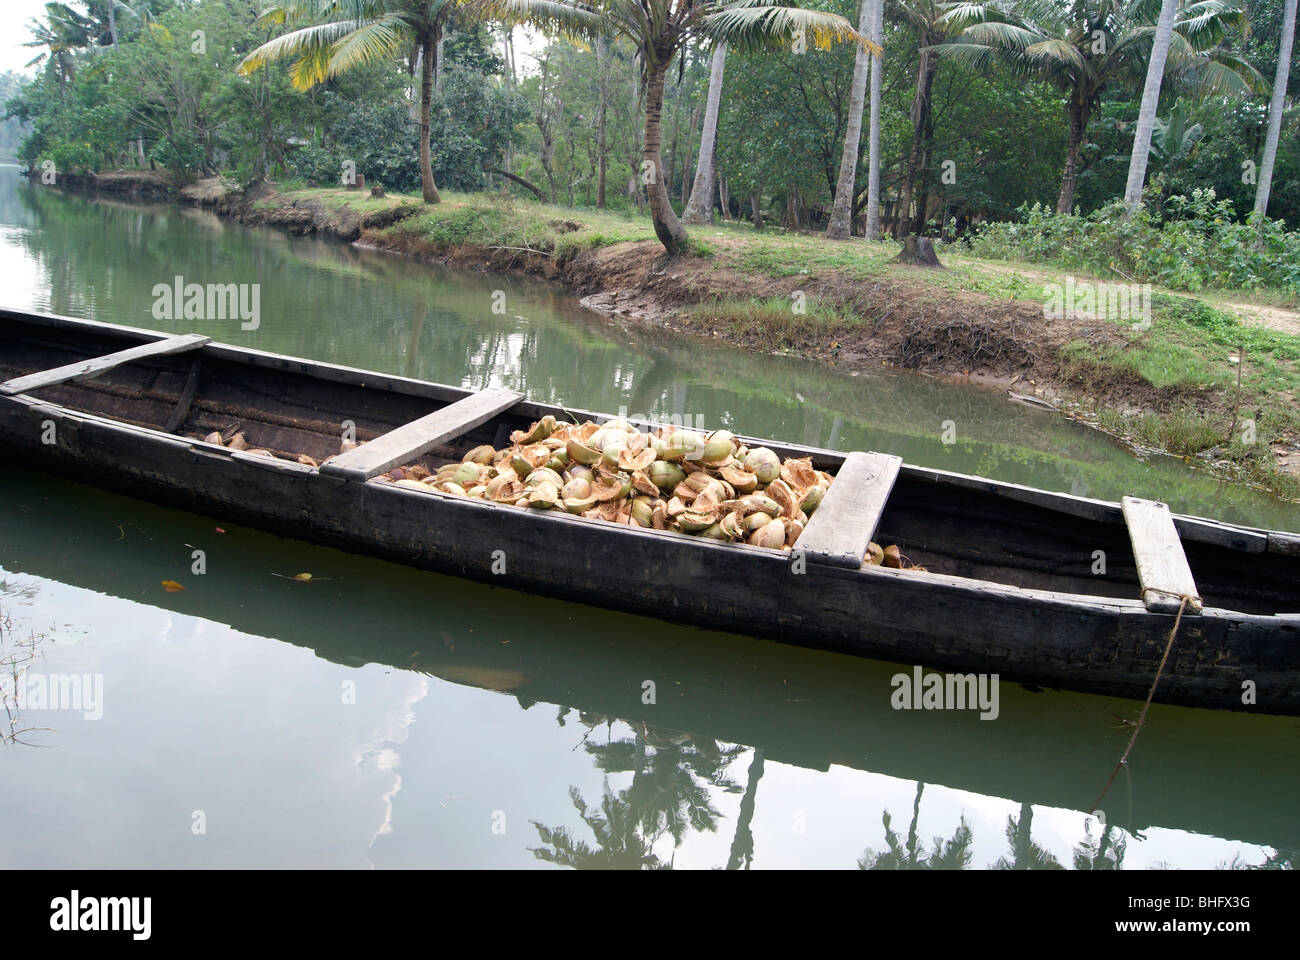 Kerala canoe goods Boat carrying Coconut shells for coir production Stock Photo